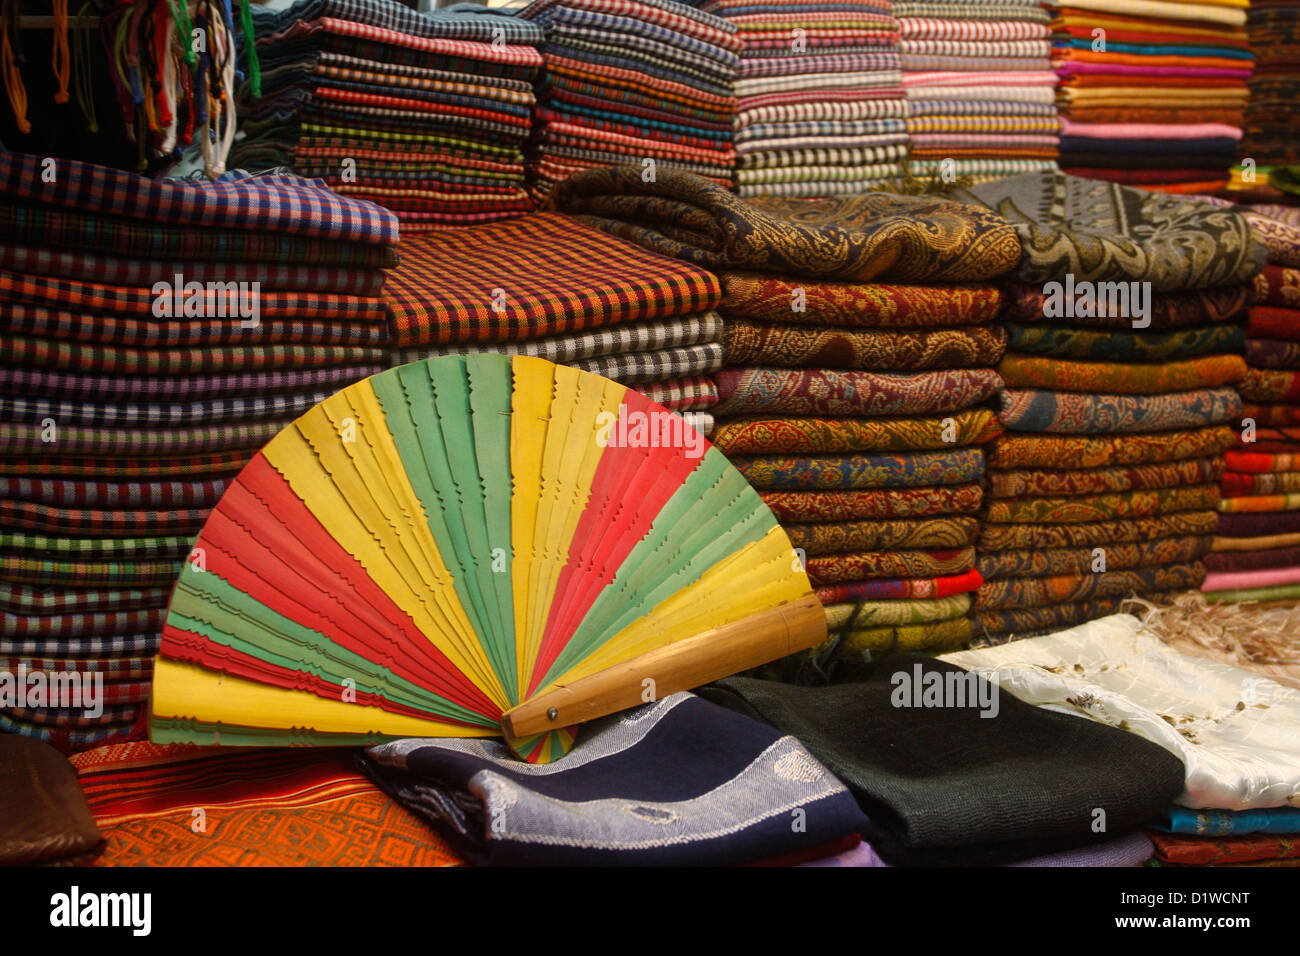 Souvenirs in Old Market, Siem Reap. Stock Photo